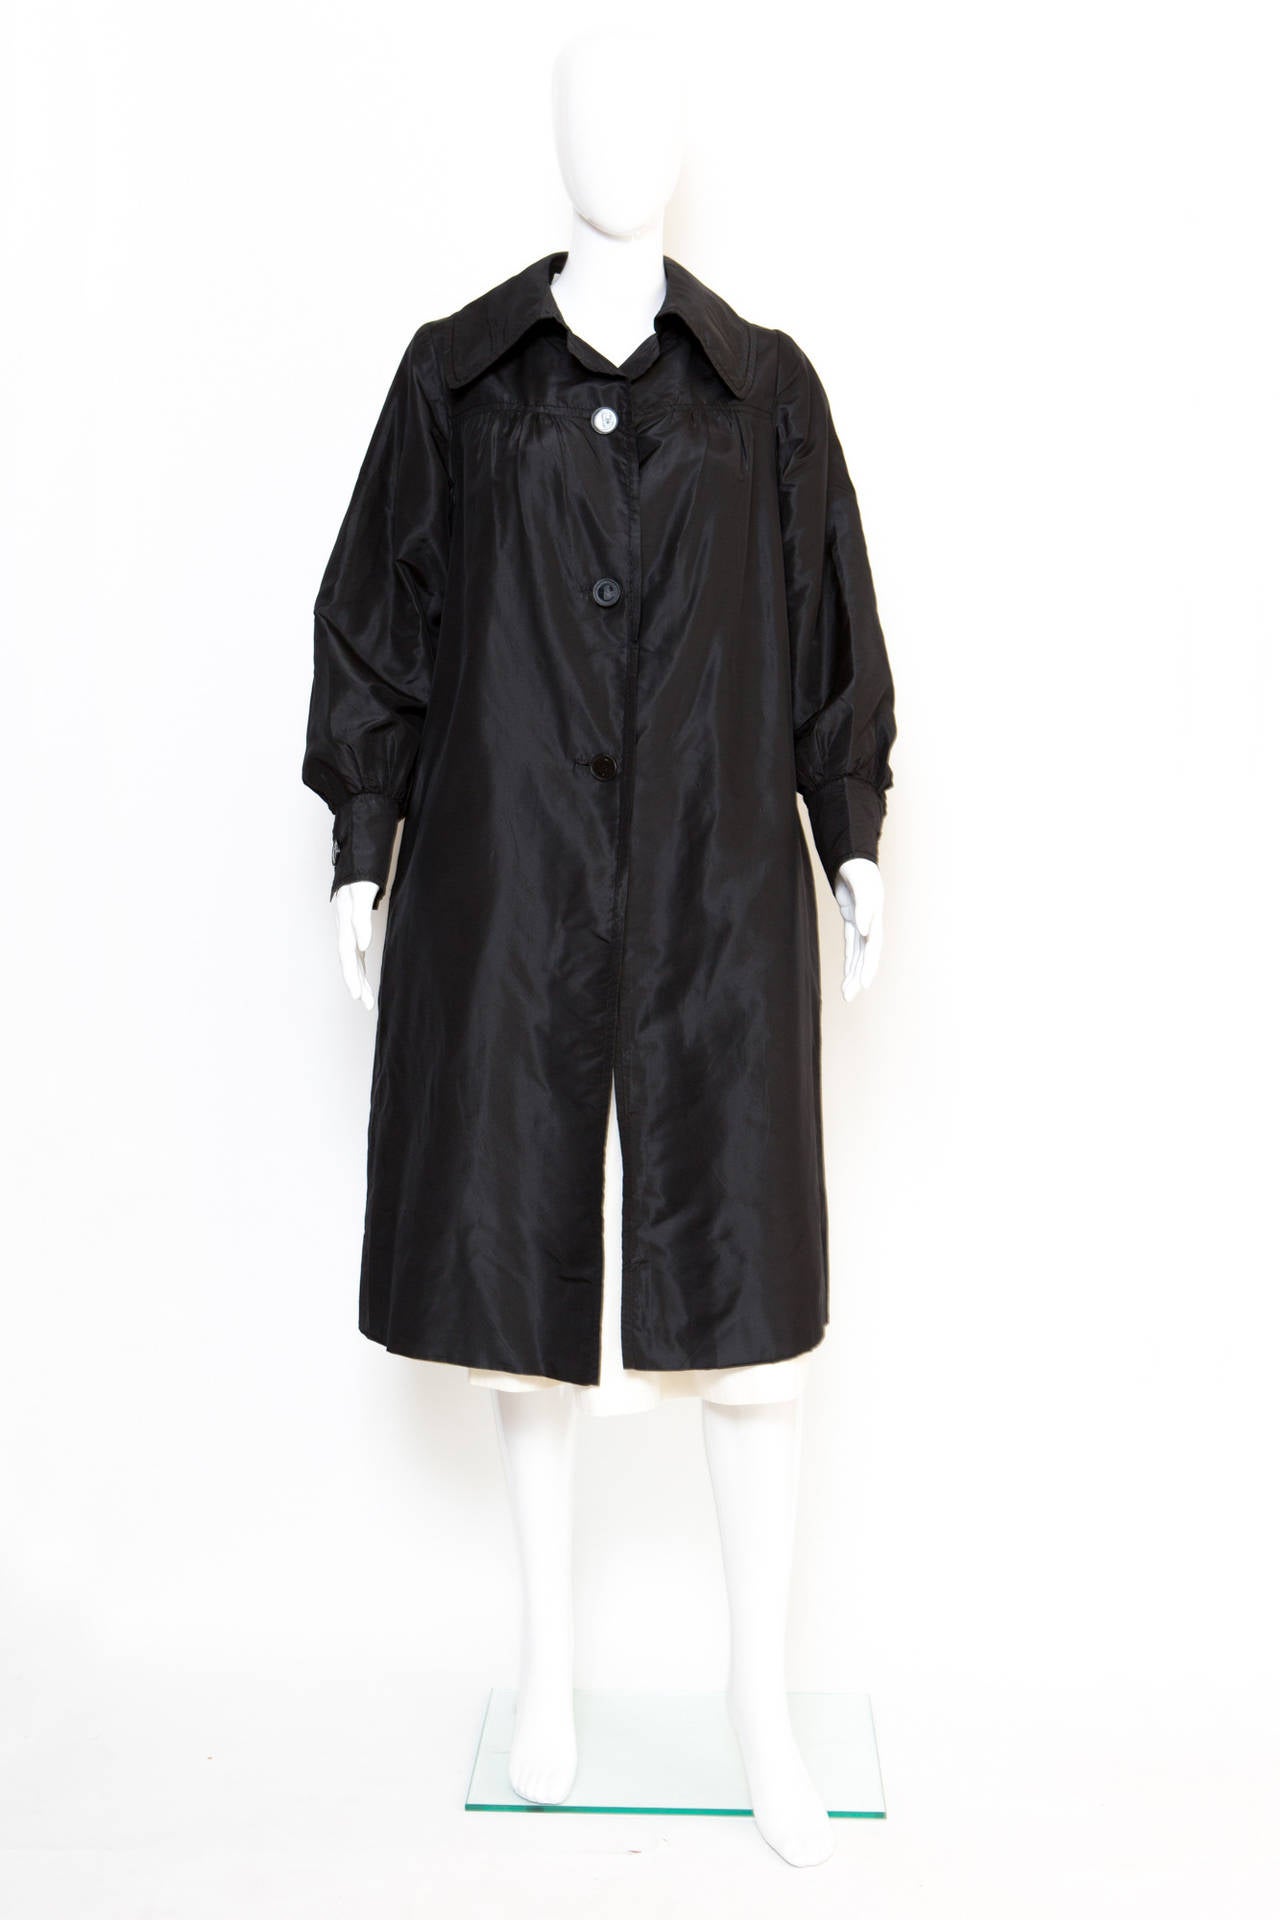 1960s Black silk trench coat from Carven featuring a classic collar, long sleeves, logo button cuffs, side pockets and a front button fastening with logo buttons. This trench is fully lined.
In good vintage condition. Made in France.
Estimated size